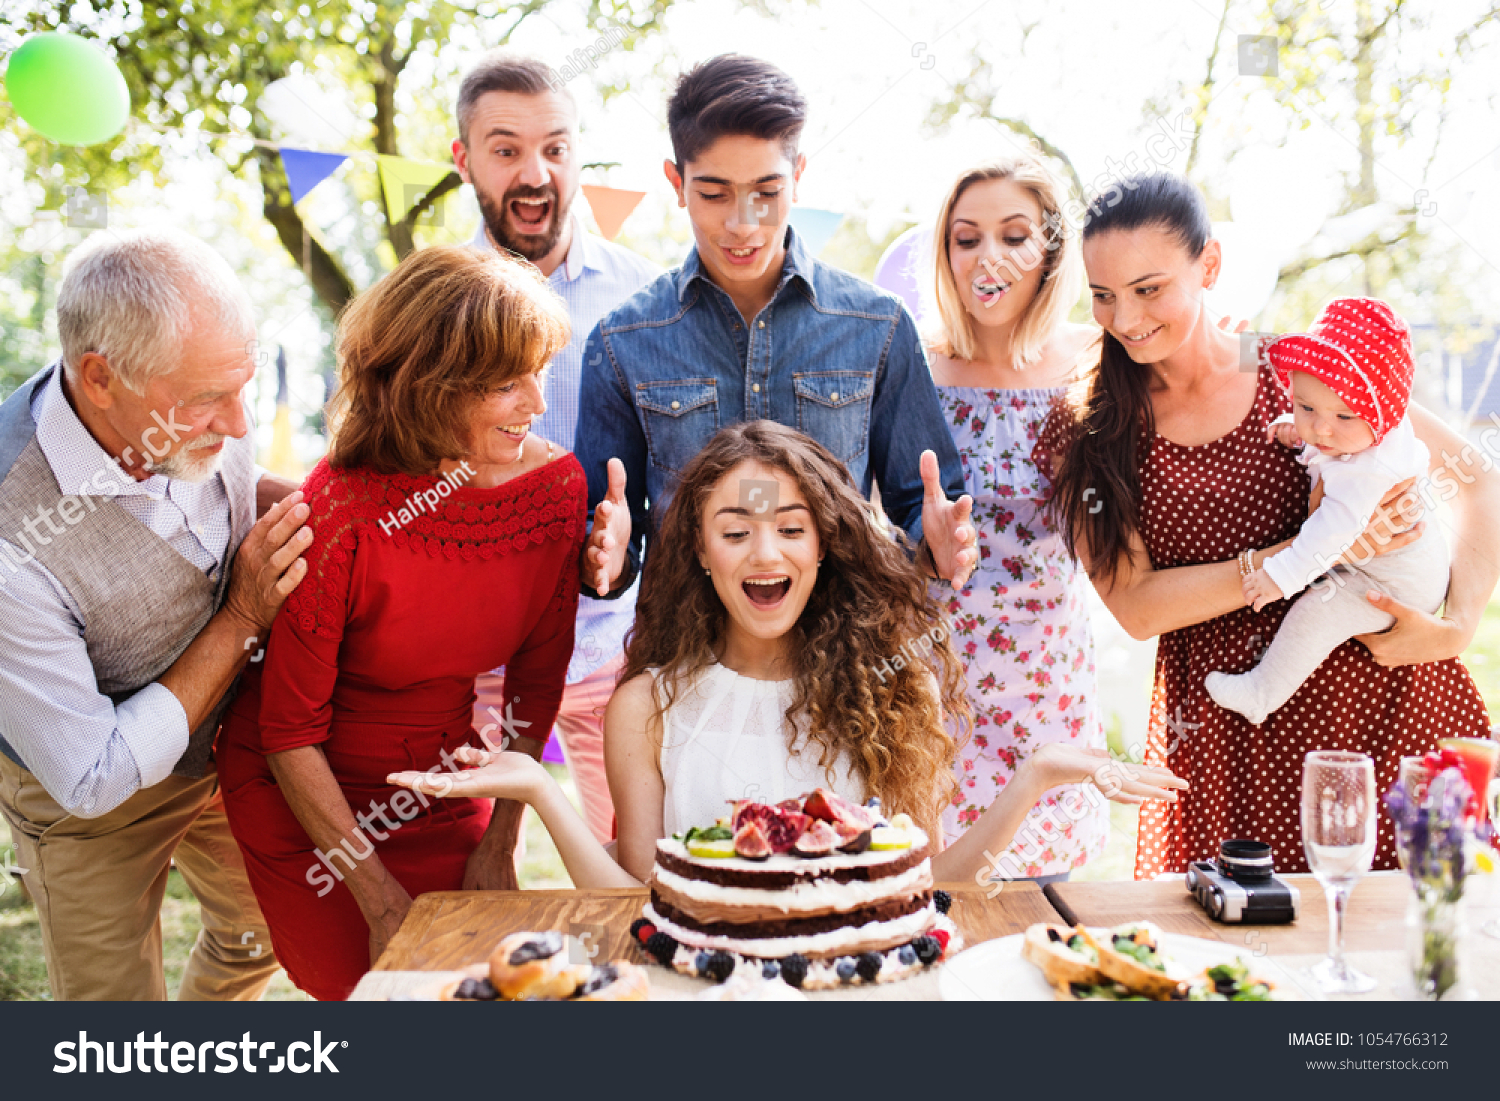 34,864 Birthday Cake Family Images, Stock Photos & Vectors | Shutterstock